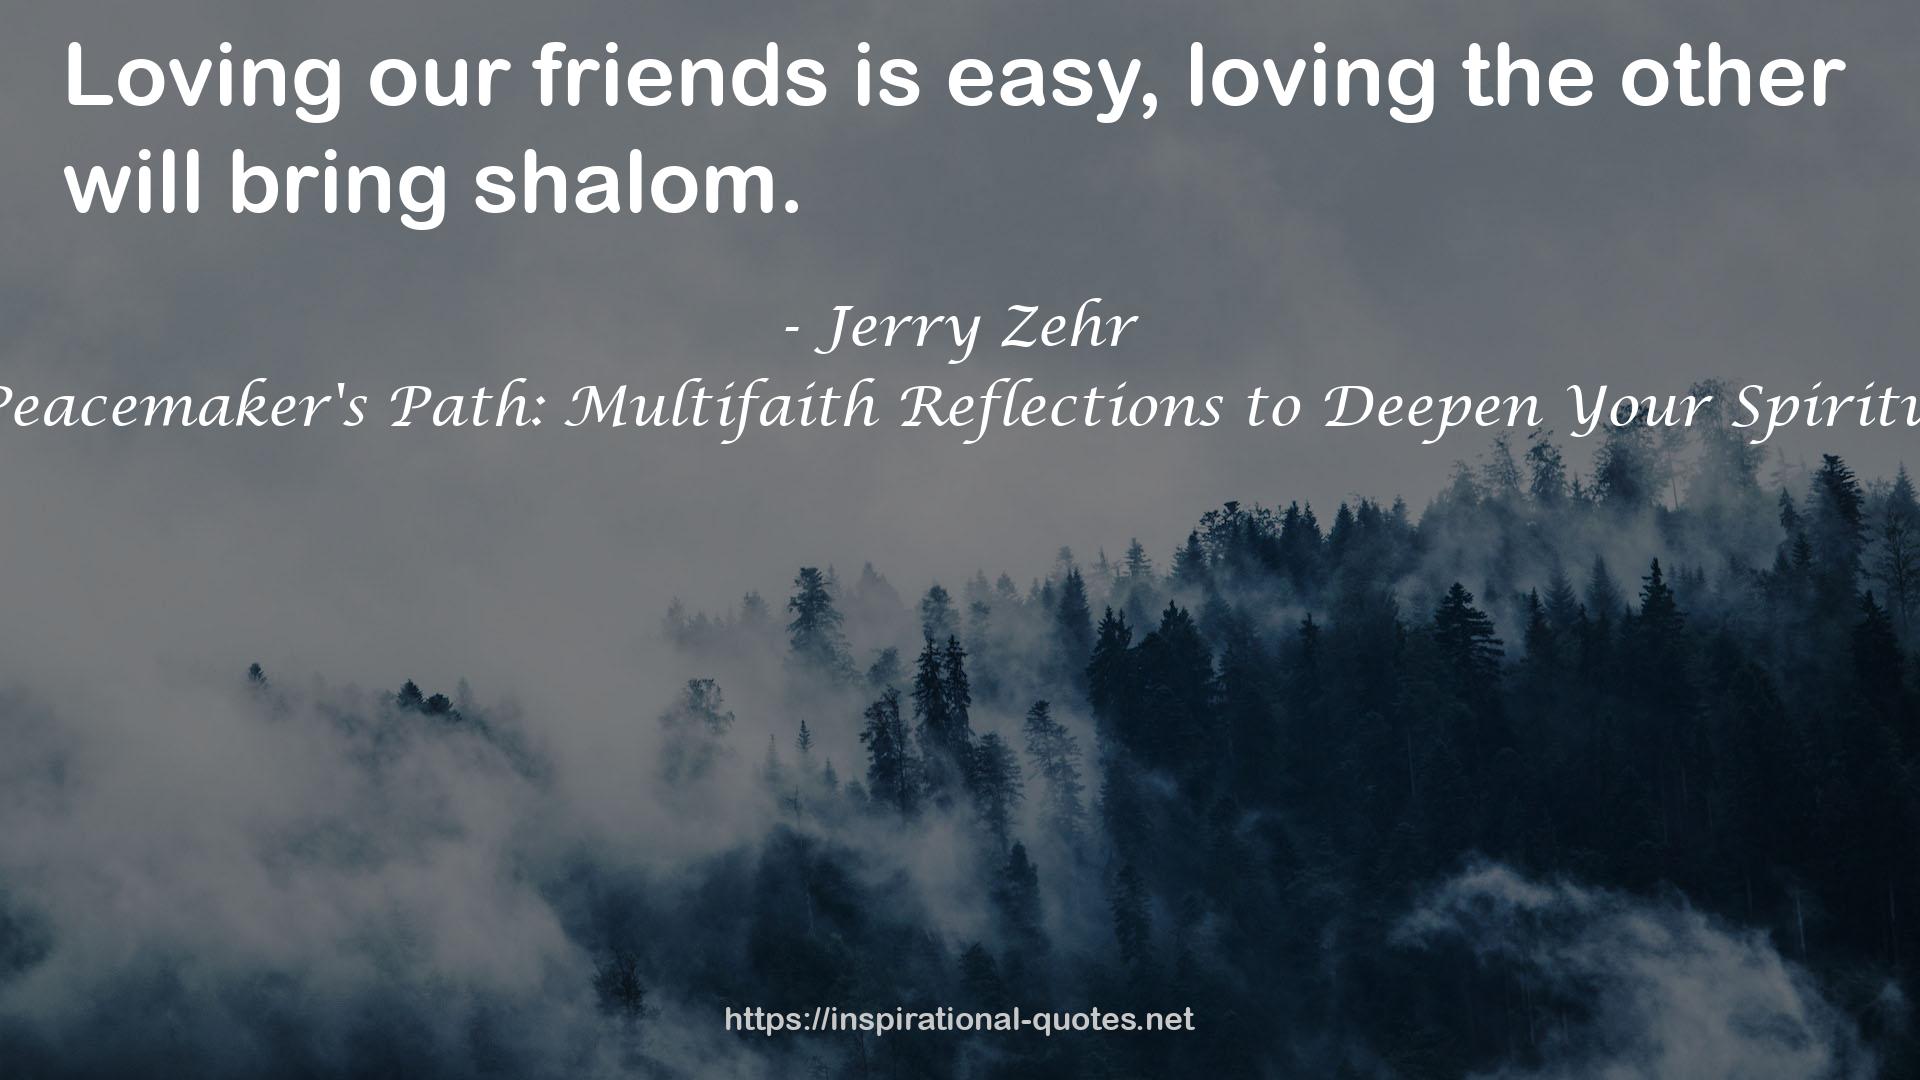 The Peacemaker's Path: Multifaith Reflections to Deepen Your Spirituality QUOTES